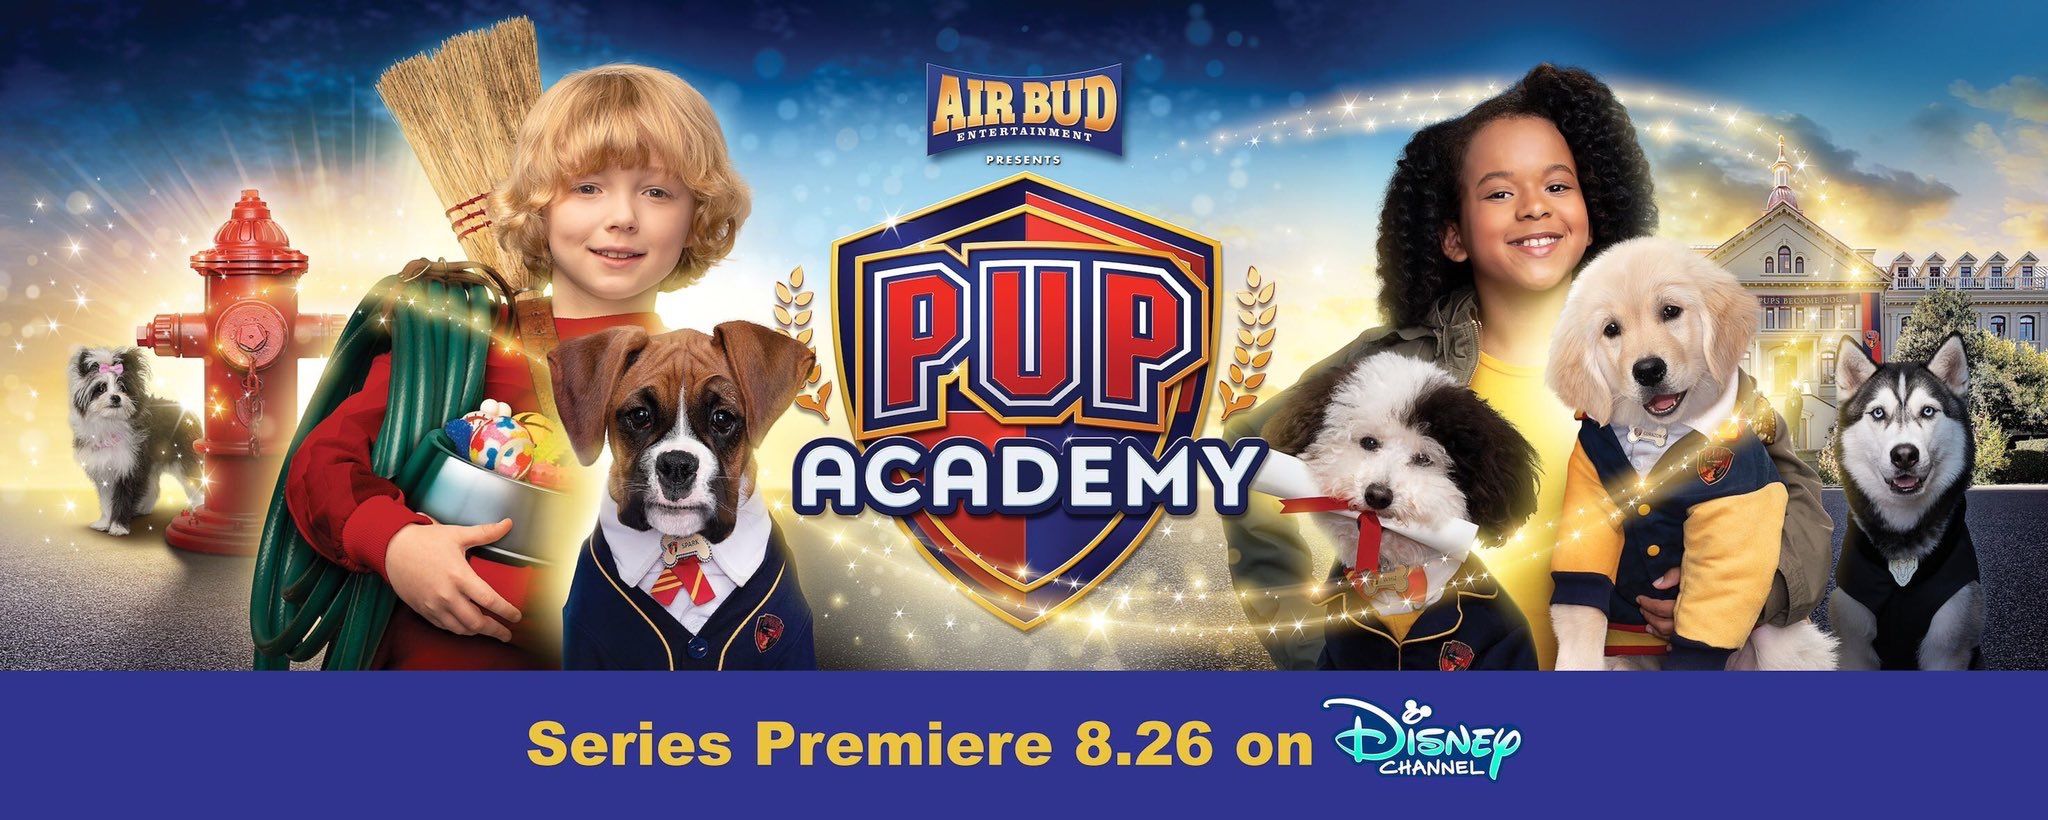 Pup Academy Coming Soon. What's On Disney Plus